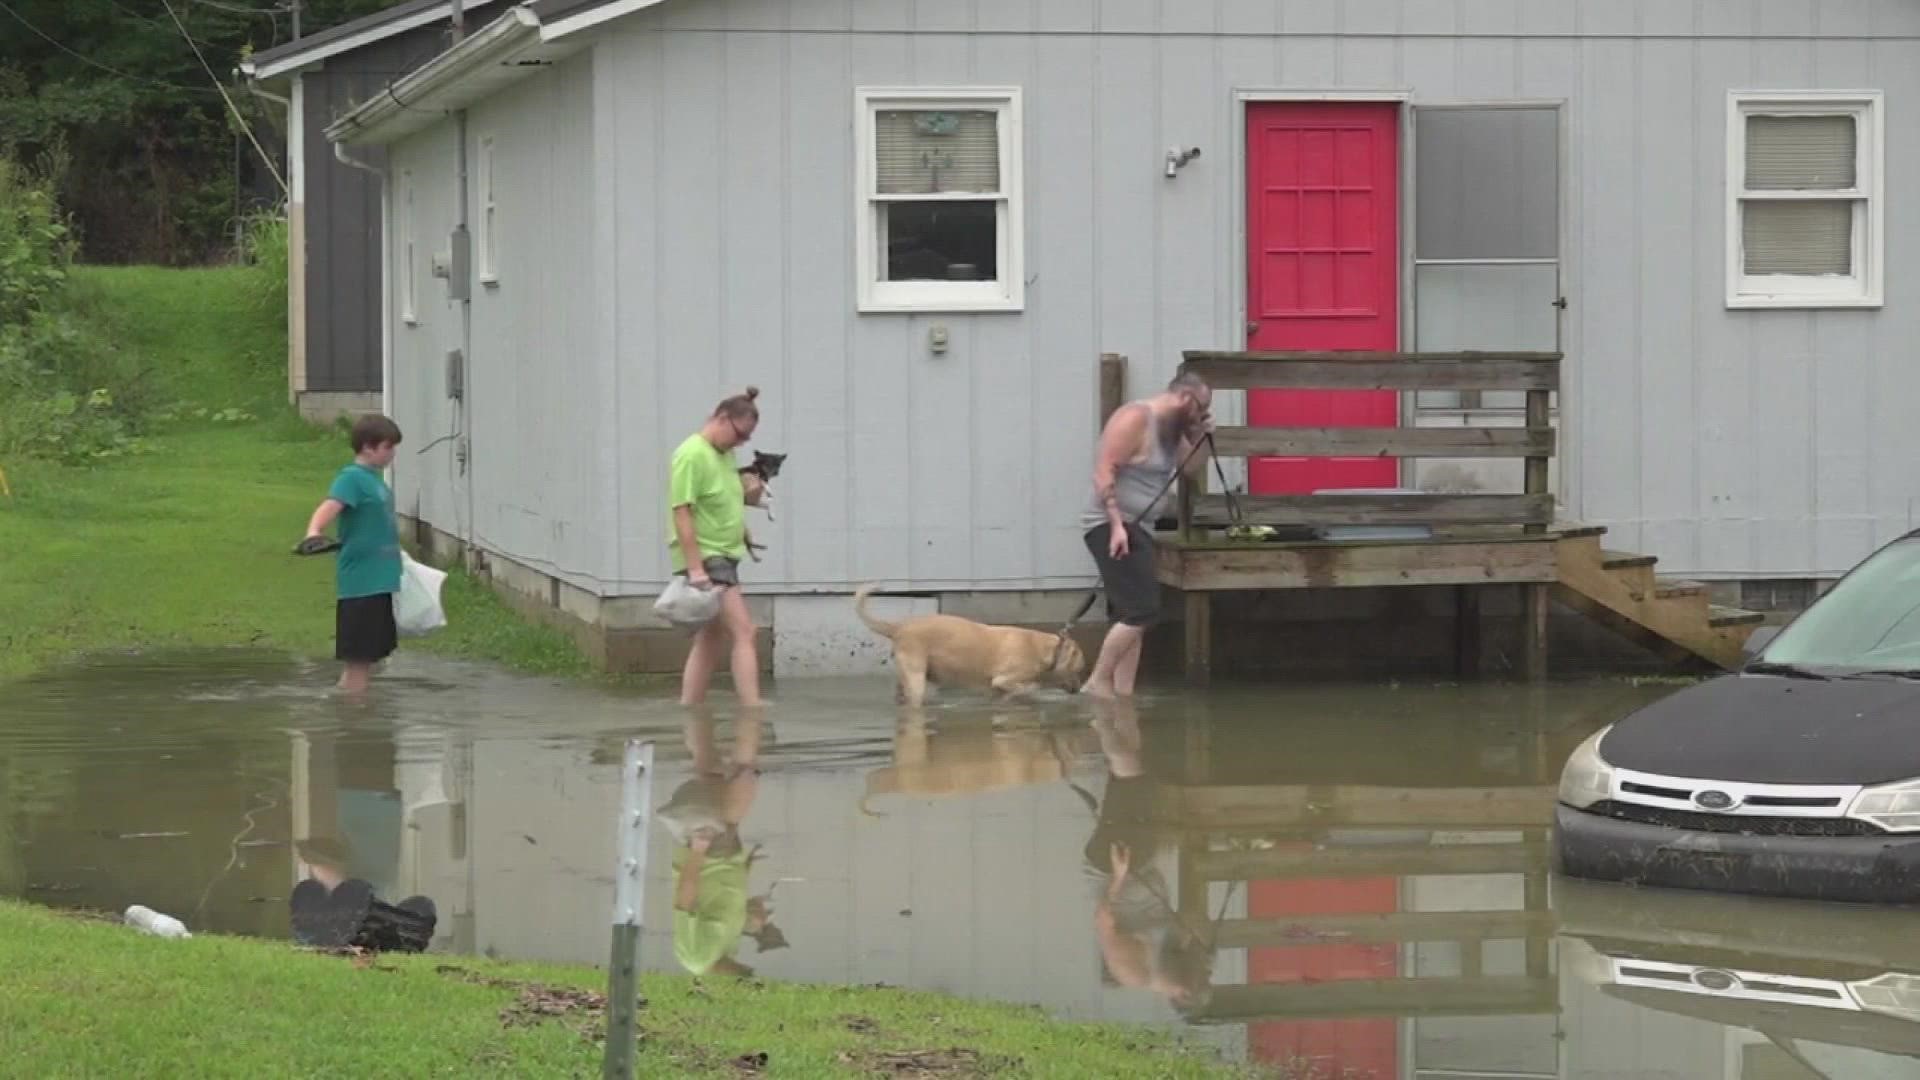 Organizations like the Red Cross and the Kentucky Humane Society are helping out in parts of eastern Kentucky hit hardest by flooding.